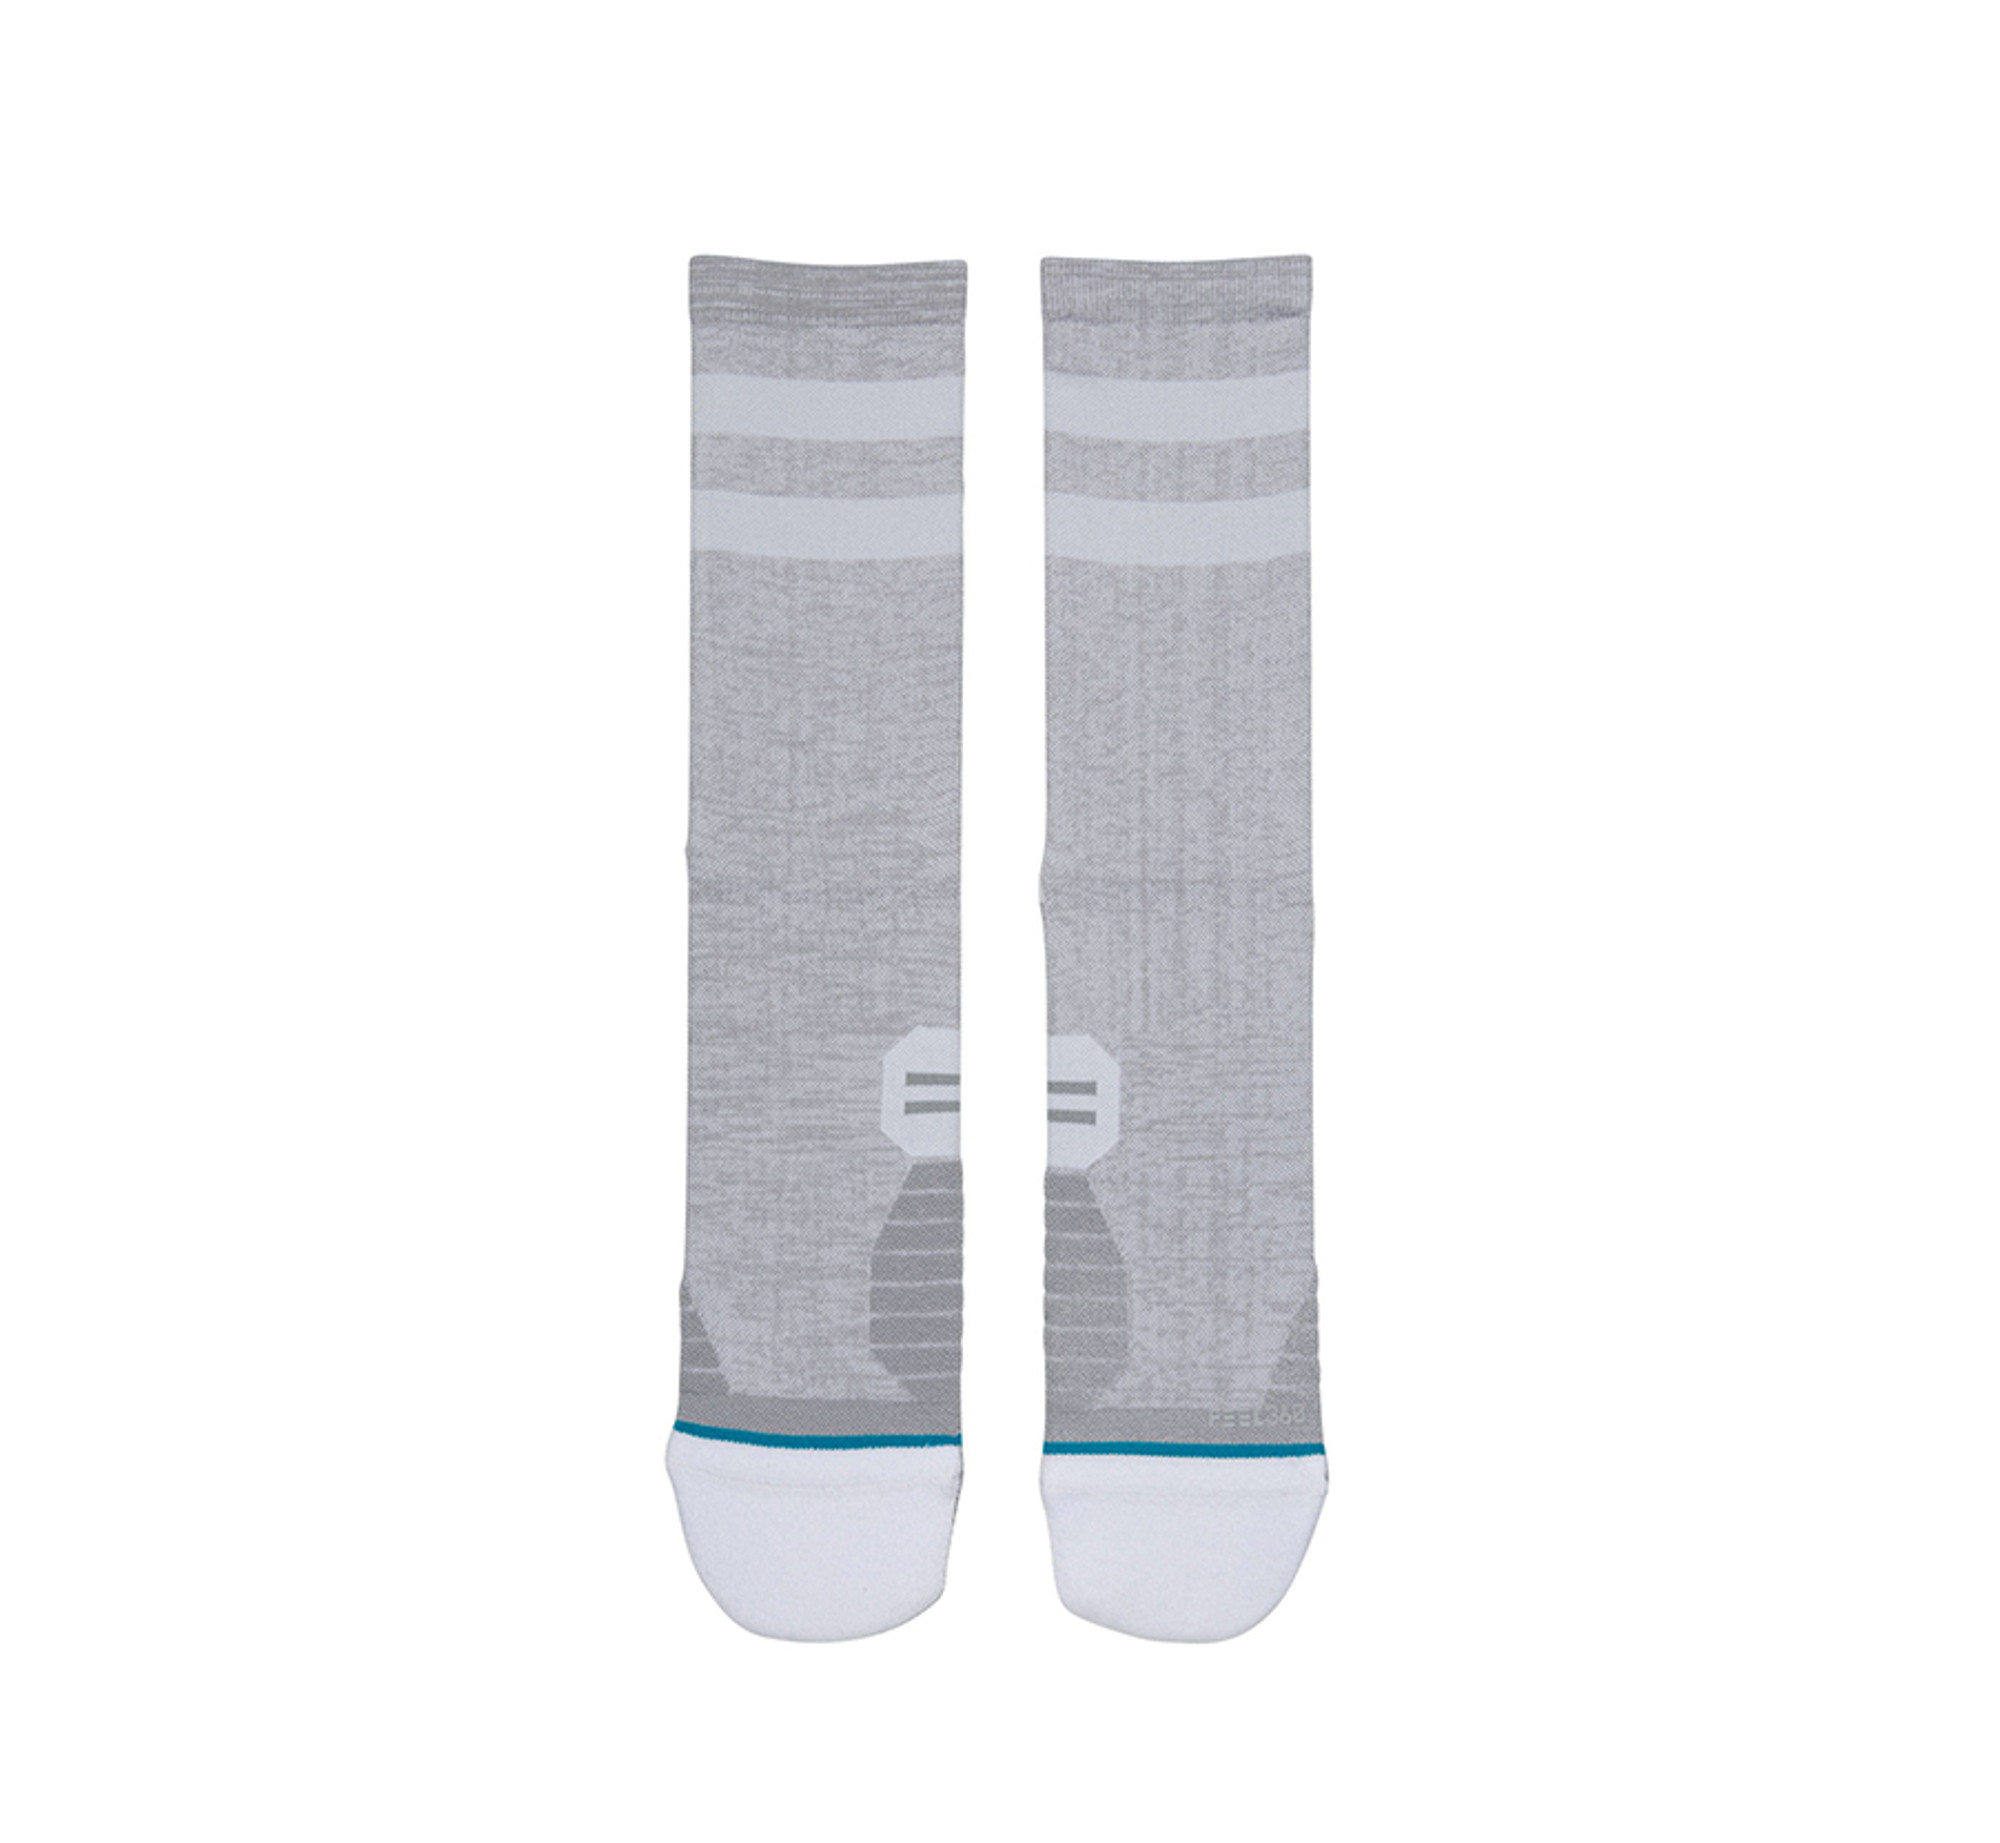 Stance Uncommon Solids Crew Sock | Shop online now at Sunlight Station